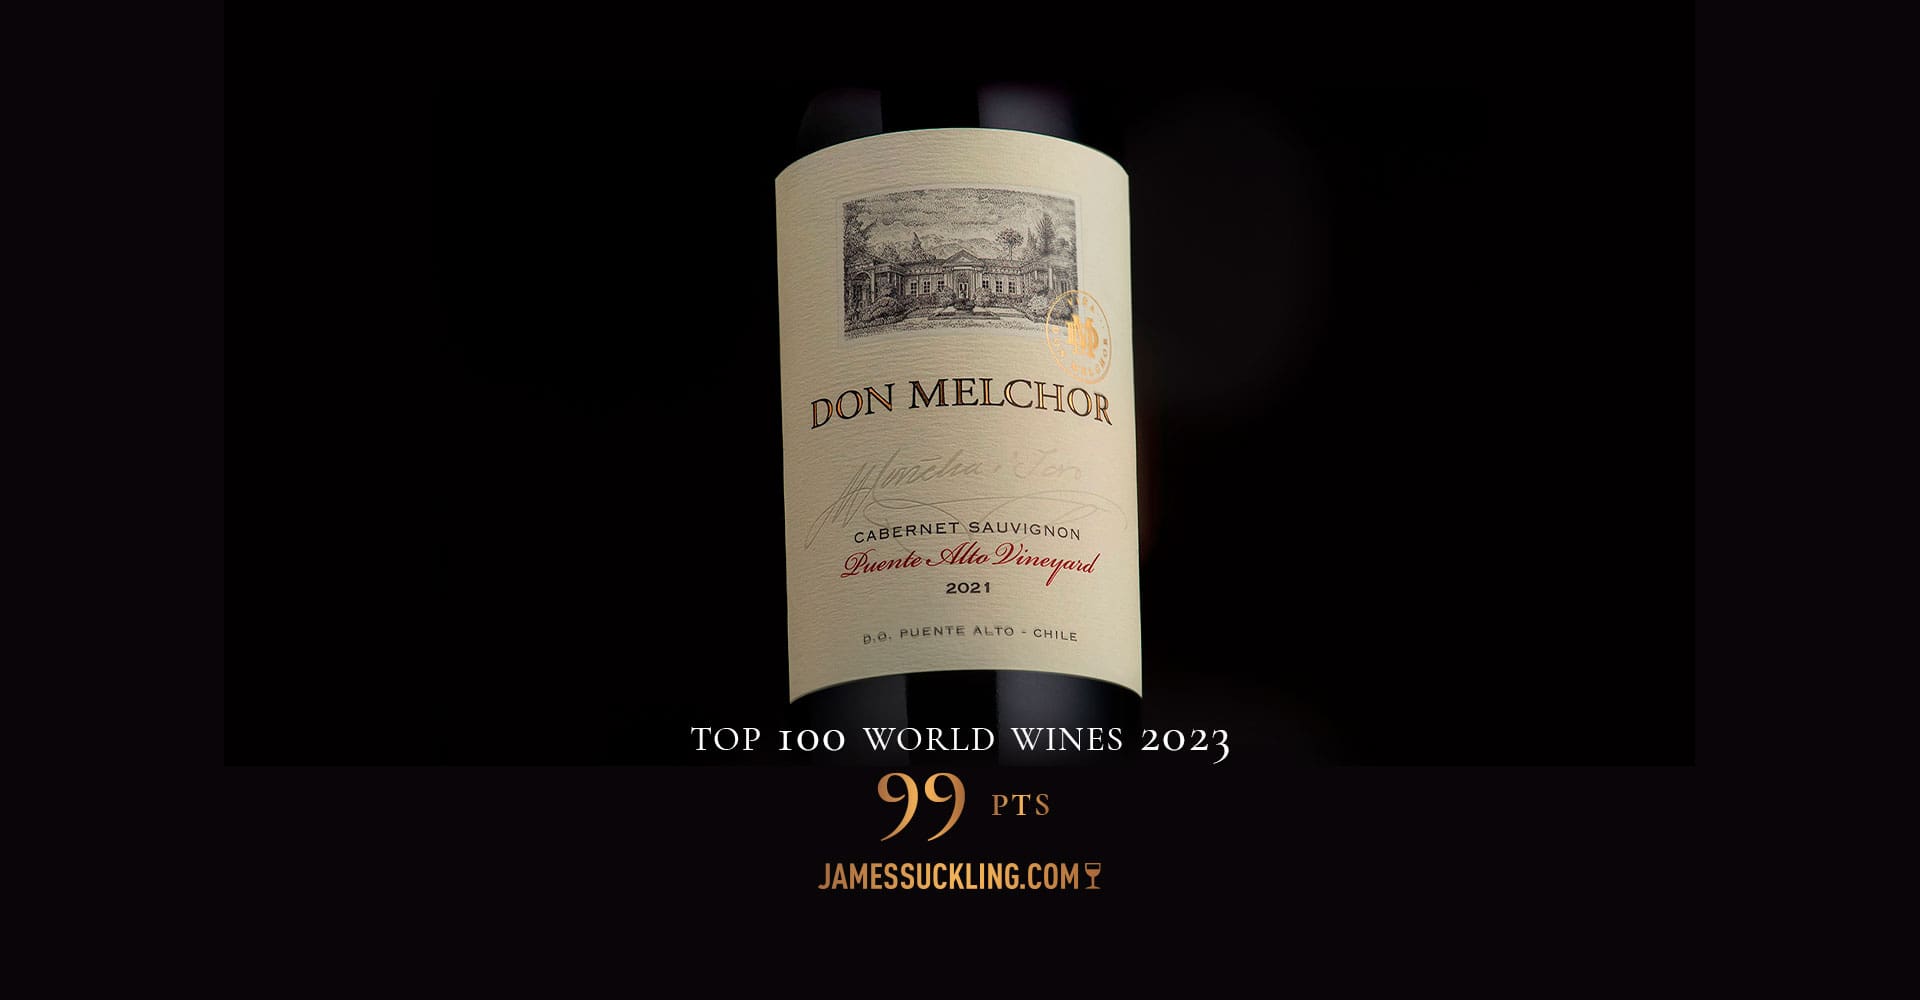 Don Melchor 2021 recognized among the Top 100 World Wines 2023 by James Suckling